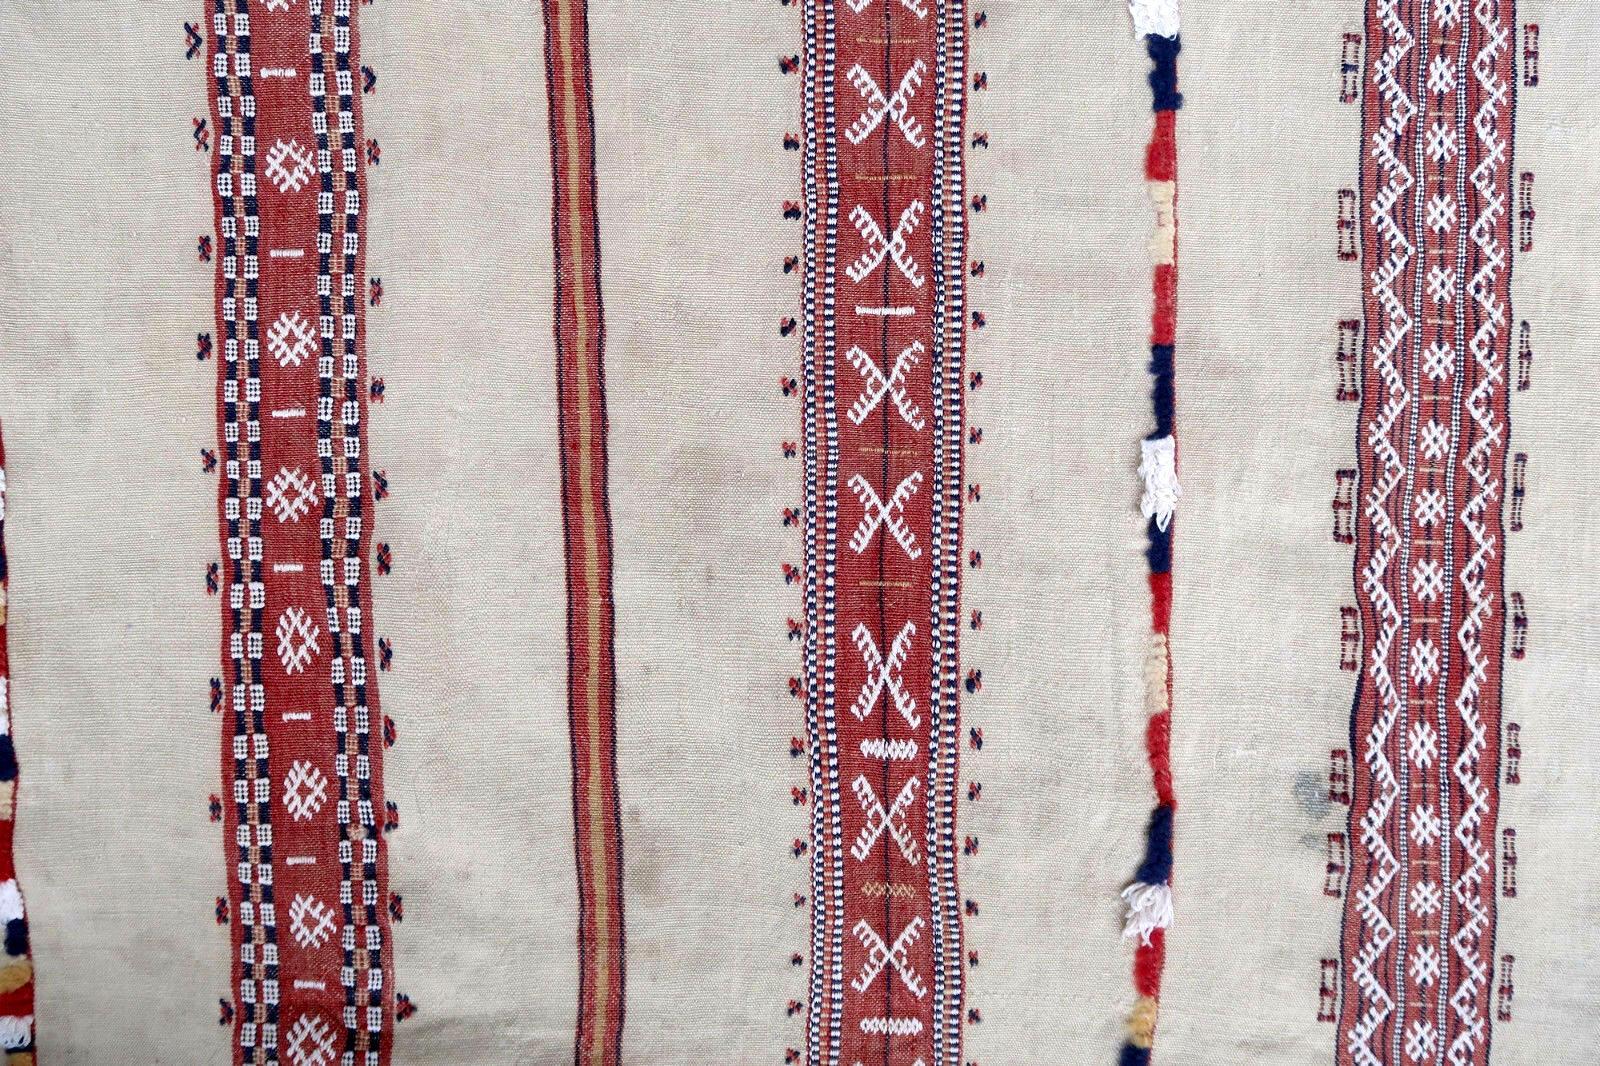 Vintage handmade Moroccan kilim in tribal design. The rug is from the middle of 20th century made in white and red wool.

-condition: original good,

-circa: 1950s,

-size: 4.6' x 8.9' (140cm x 270cm),

-material: wool,

-country of